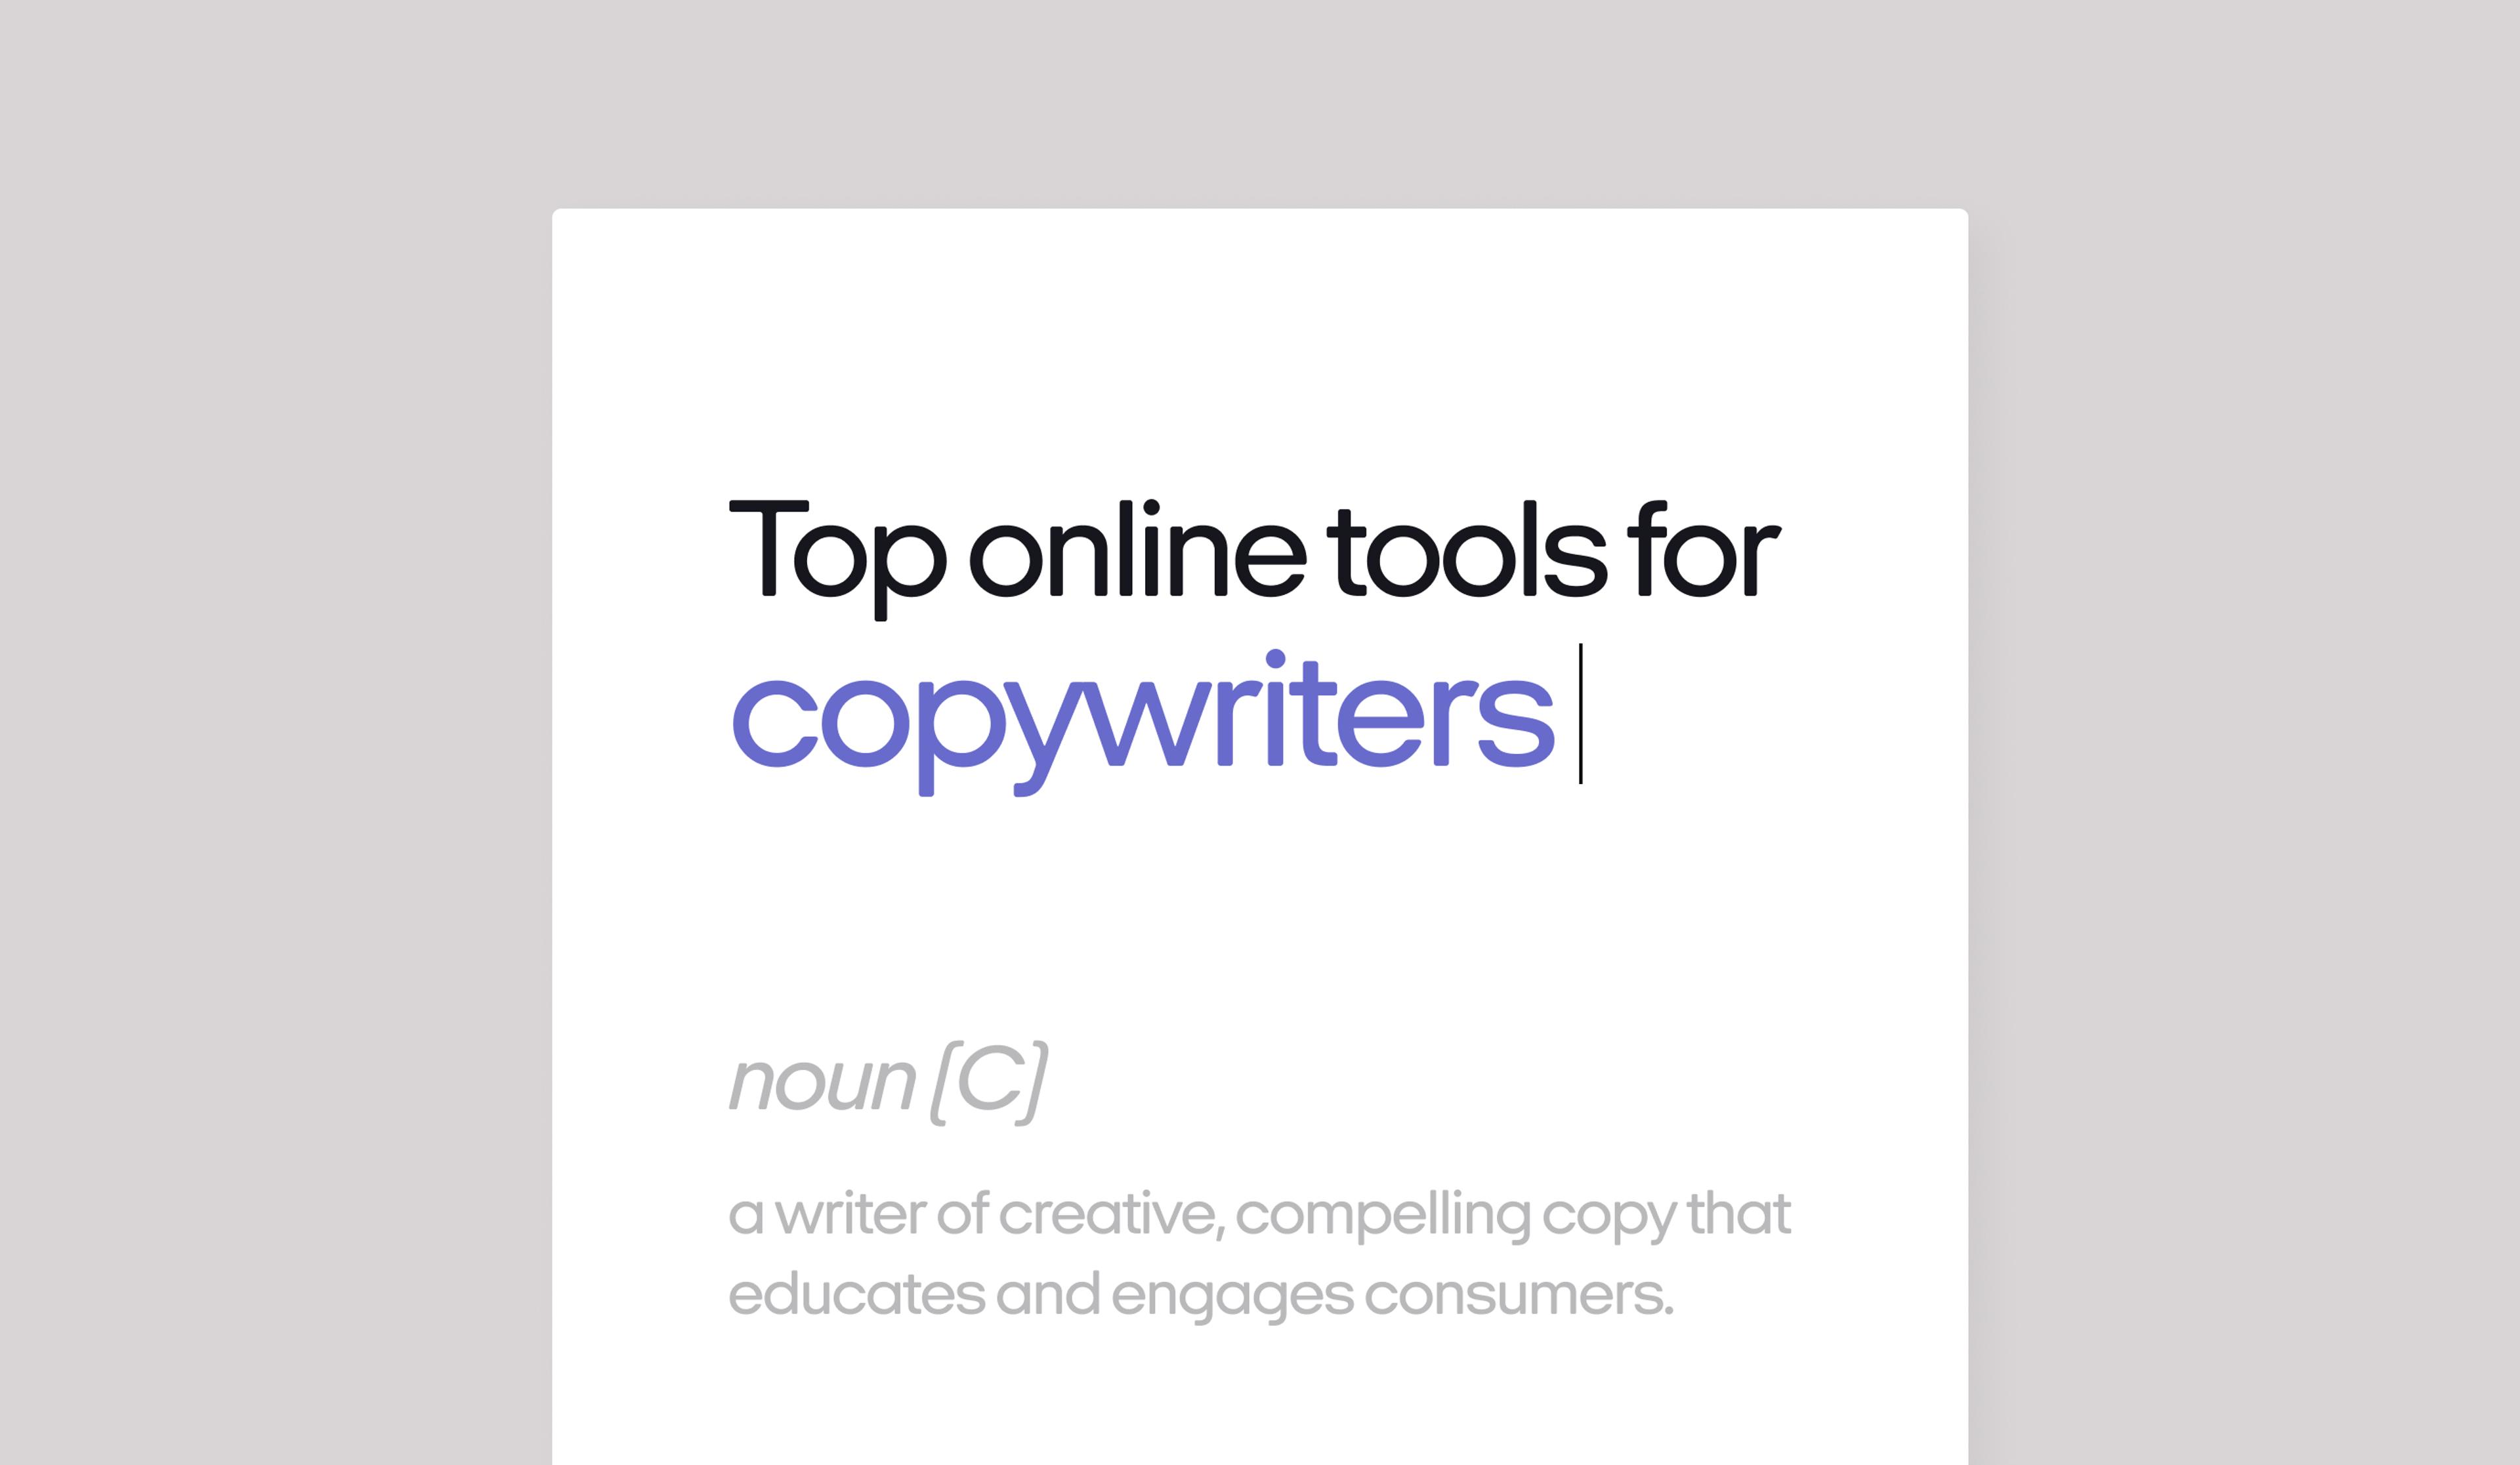 Our top online tools for copywriters